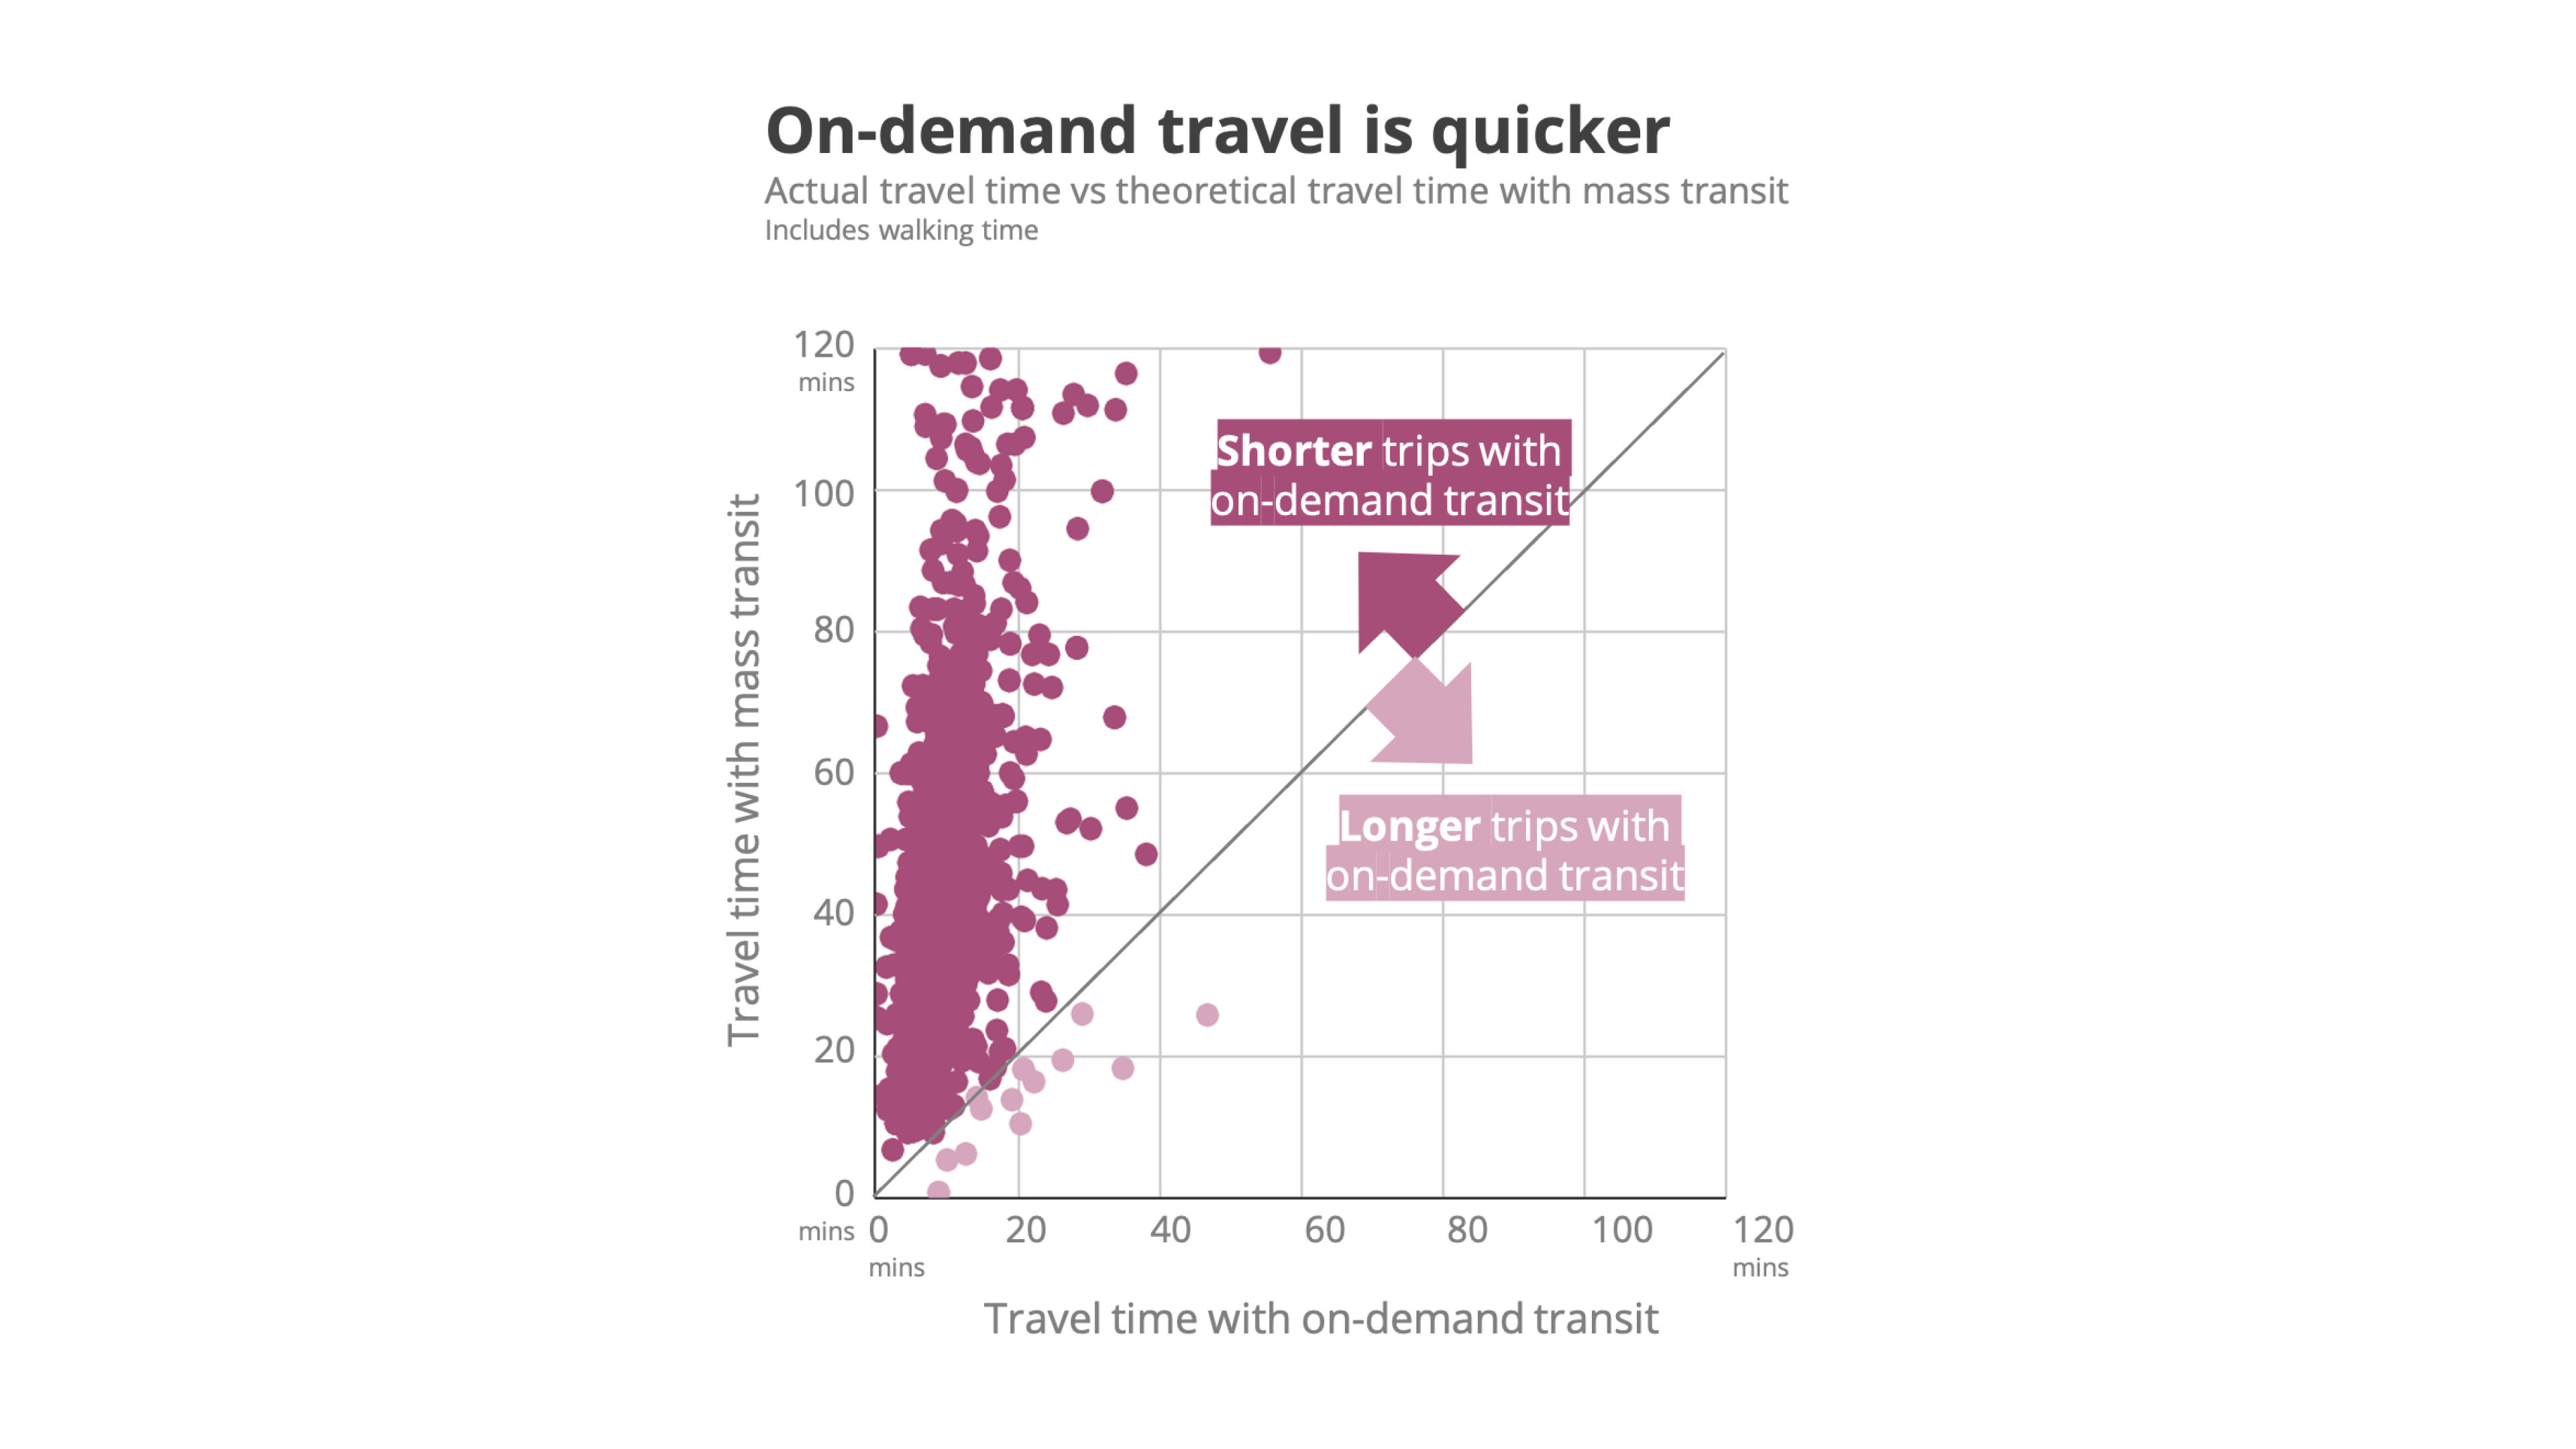 Survey results show on-demand travel is quicker